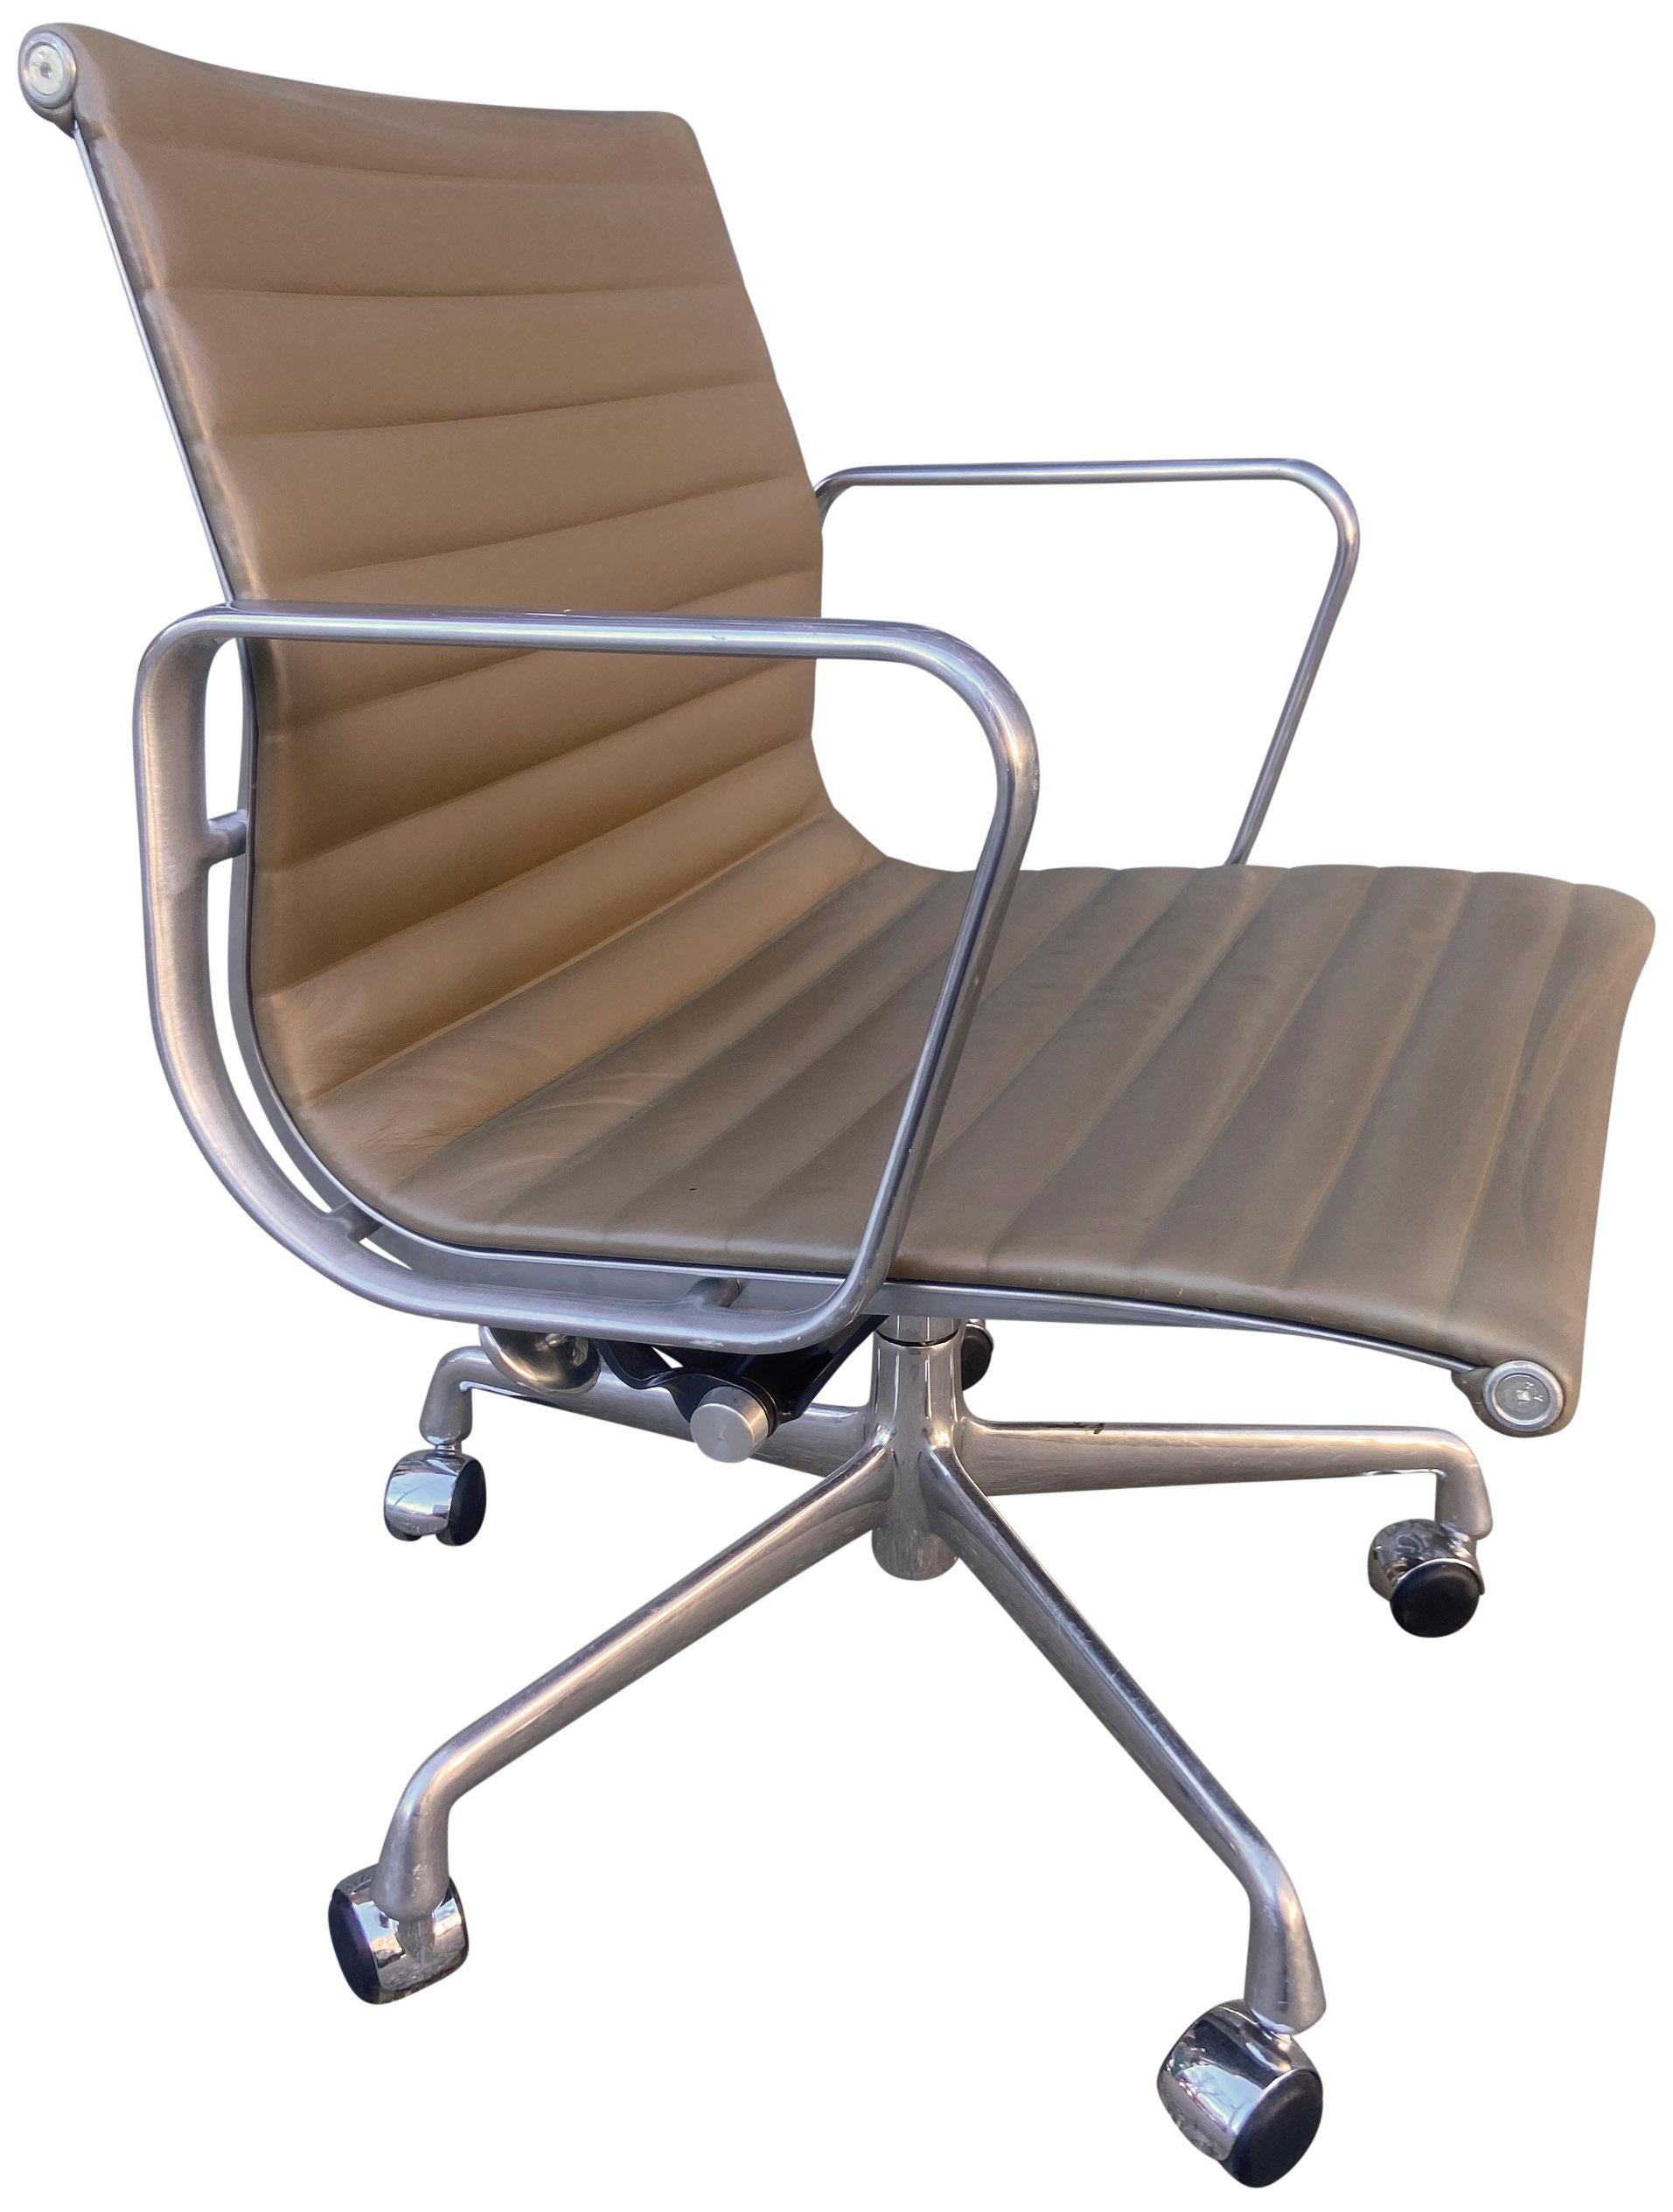 For your consideration we have up to 7 Eames for Herman Miller executive chairs in beige / light brown leather with low backs. These are from 2000s full tilt, manual height adjustment, and swivel with carpet / hardwood casters. Typical marks and